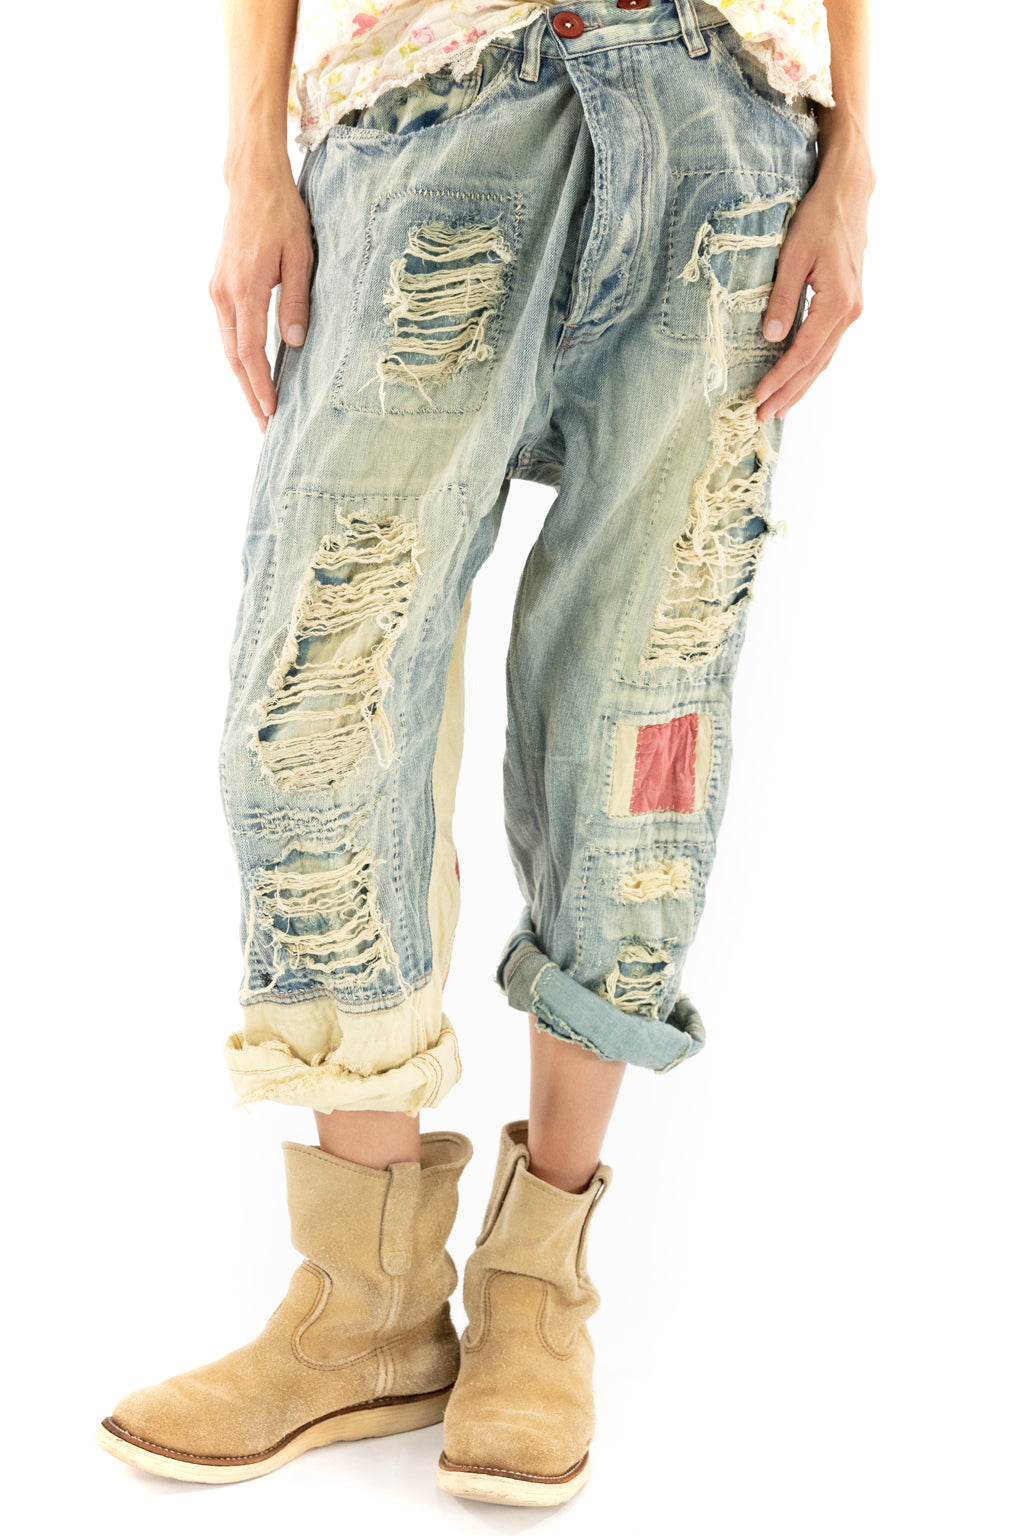 MINER DENIMS - AMERICANA - Kingfisher Road - Online Boutique